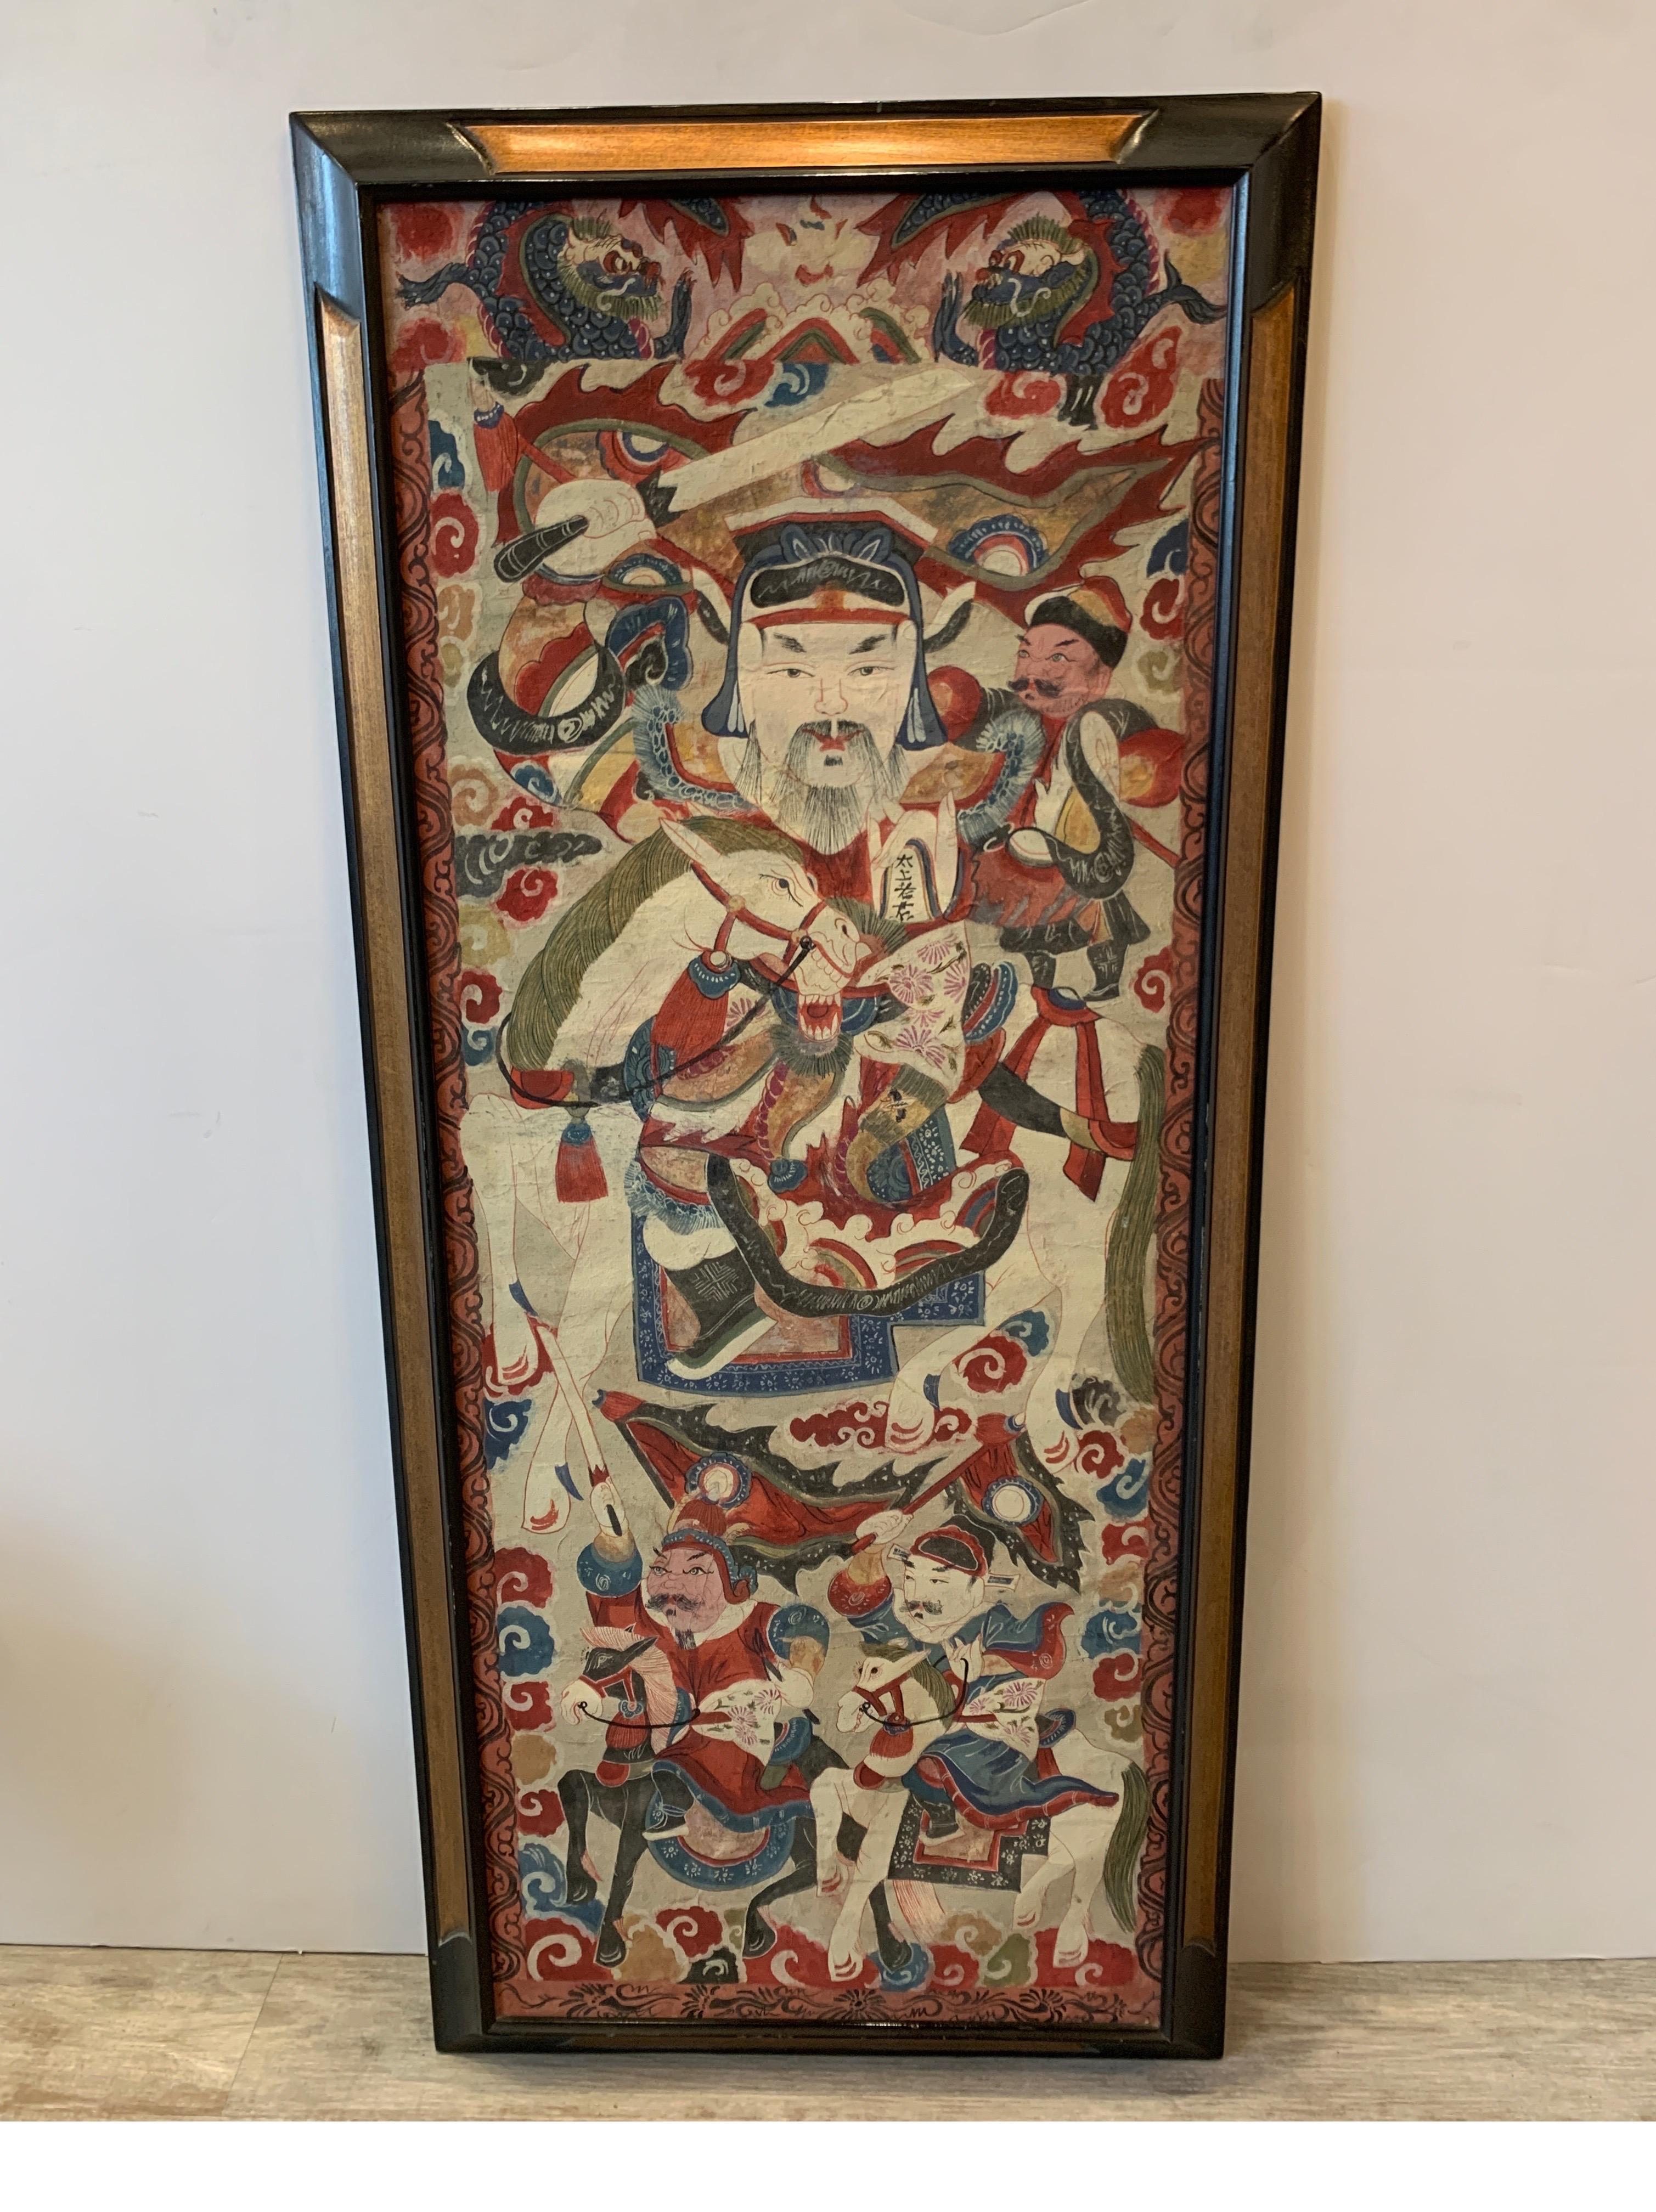 A Chinese watercolor on paper in Iron red and cobalt blue of warriors and nobleman in a later lacquered and gilt wood frame, circa 1920. Some light aging to the paper expected with age.